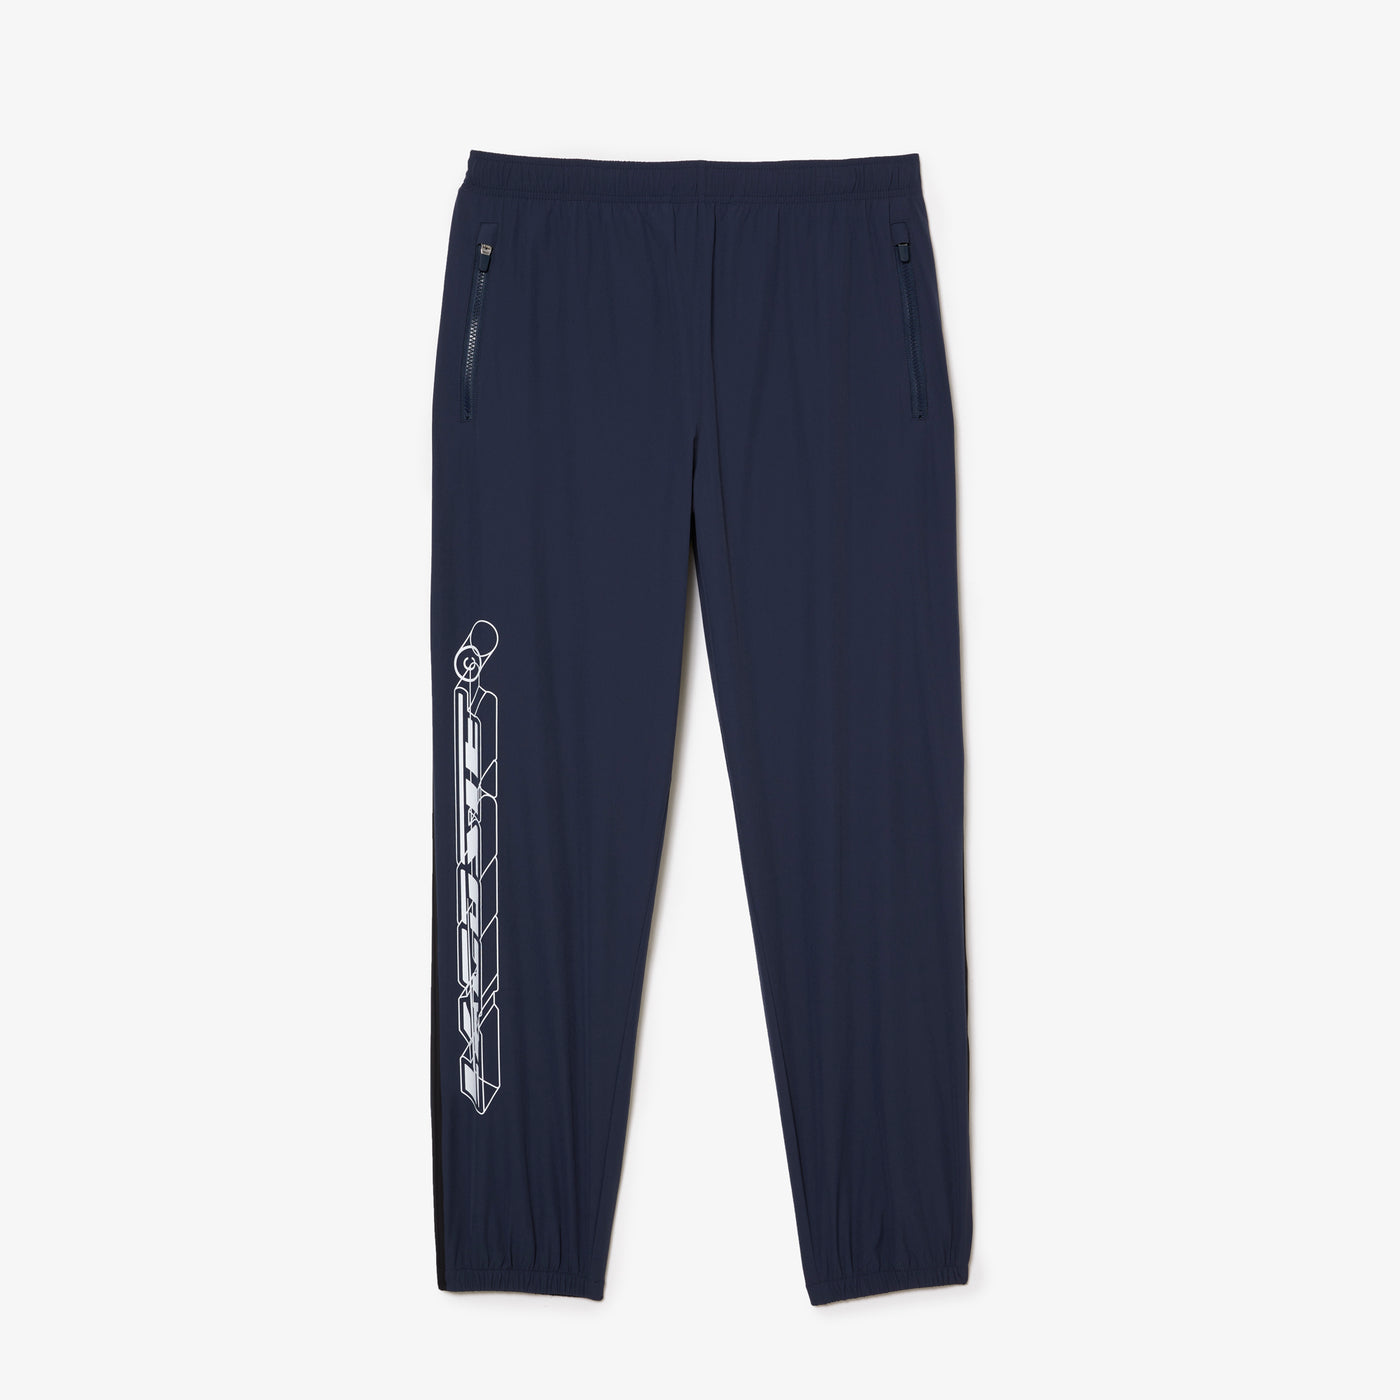 Shop The Latest Collection Of Lacoste Men’S Lacoste Showerproof Stretch Track Pants - Xh5448 In Lebanon